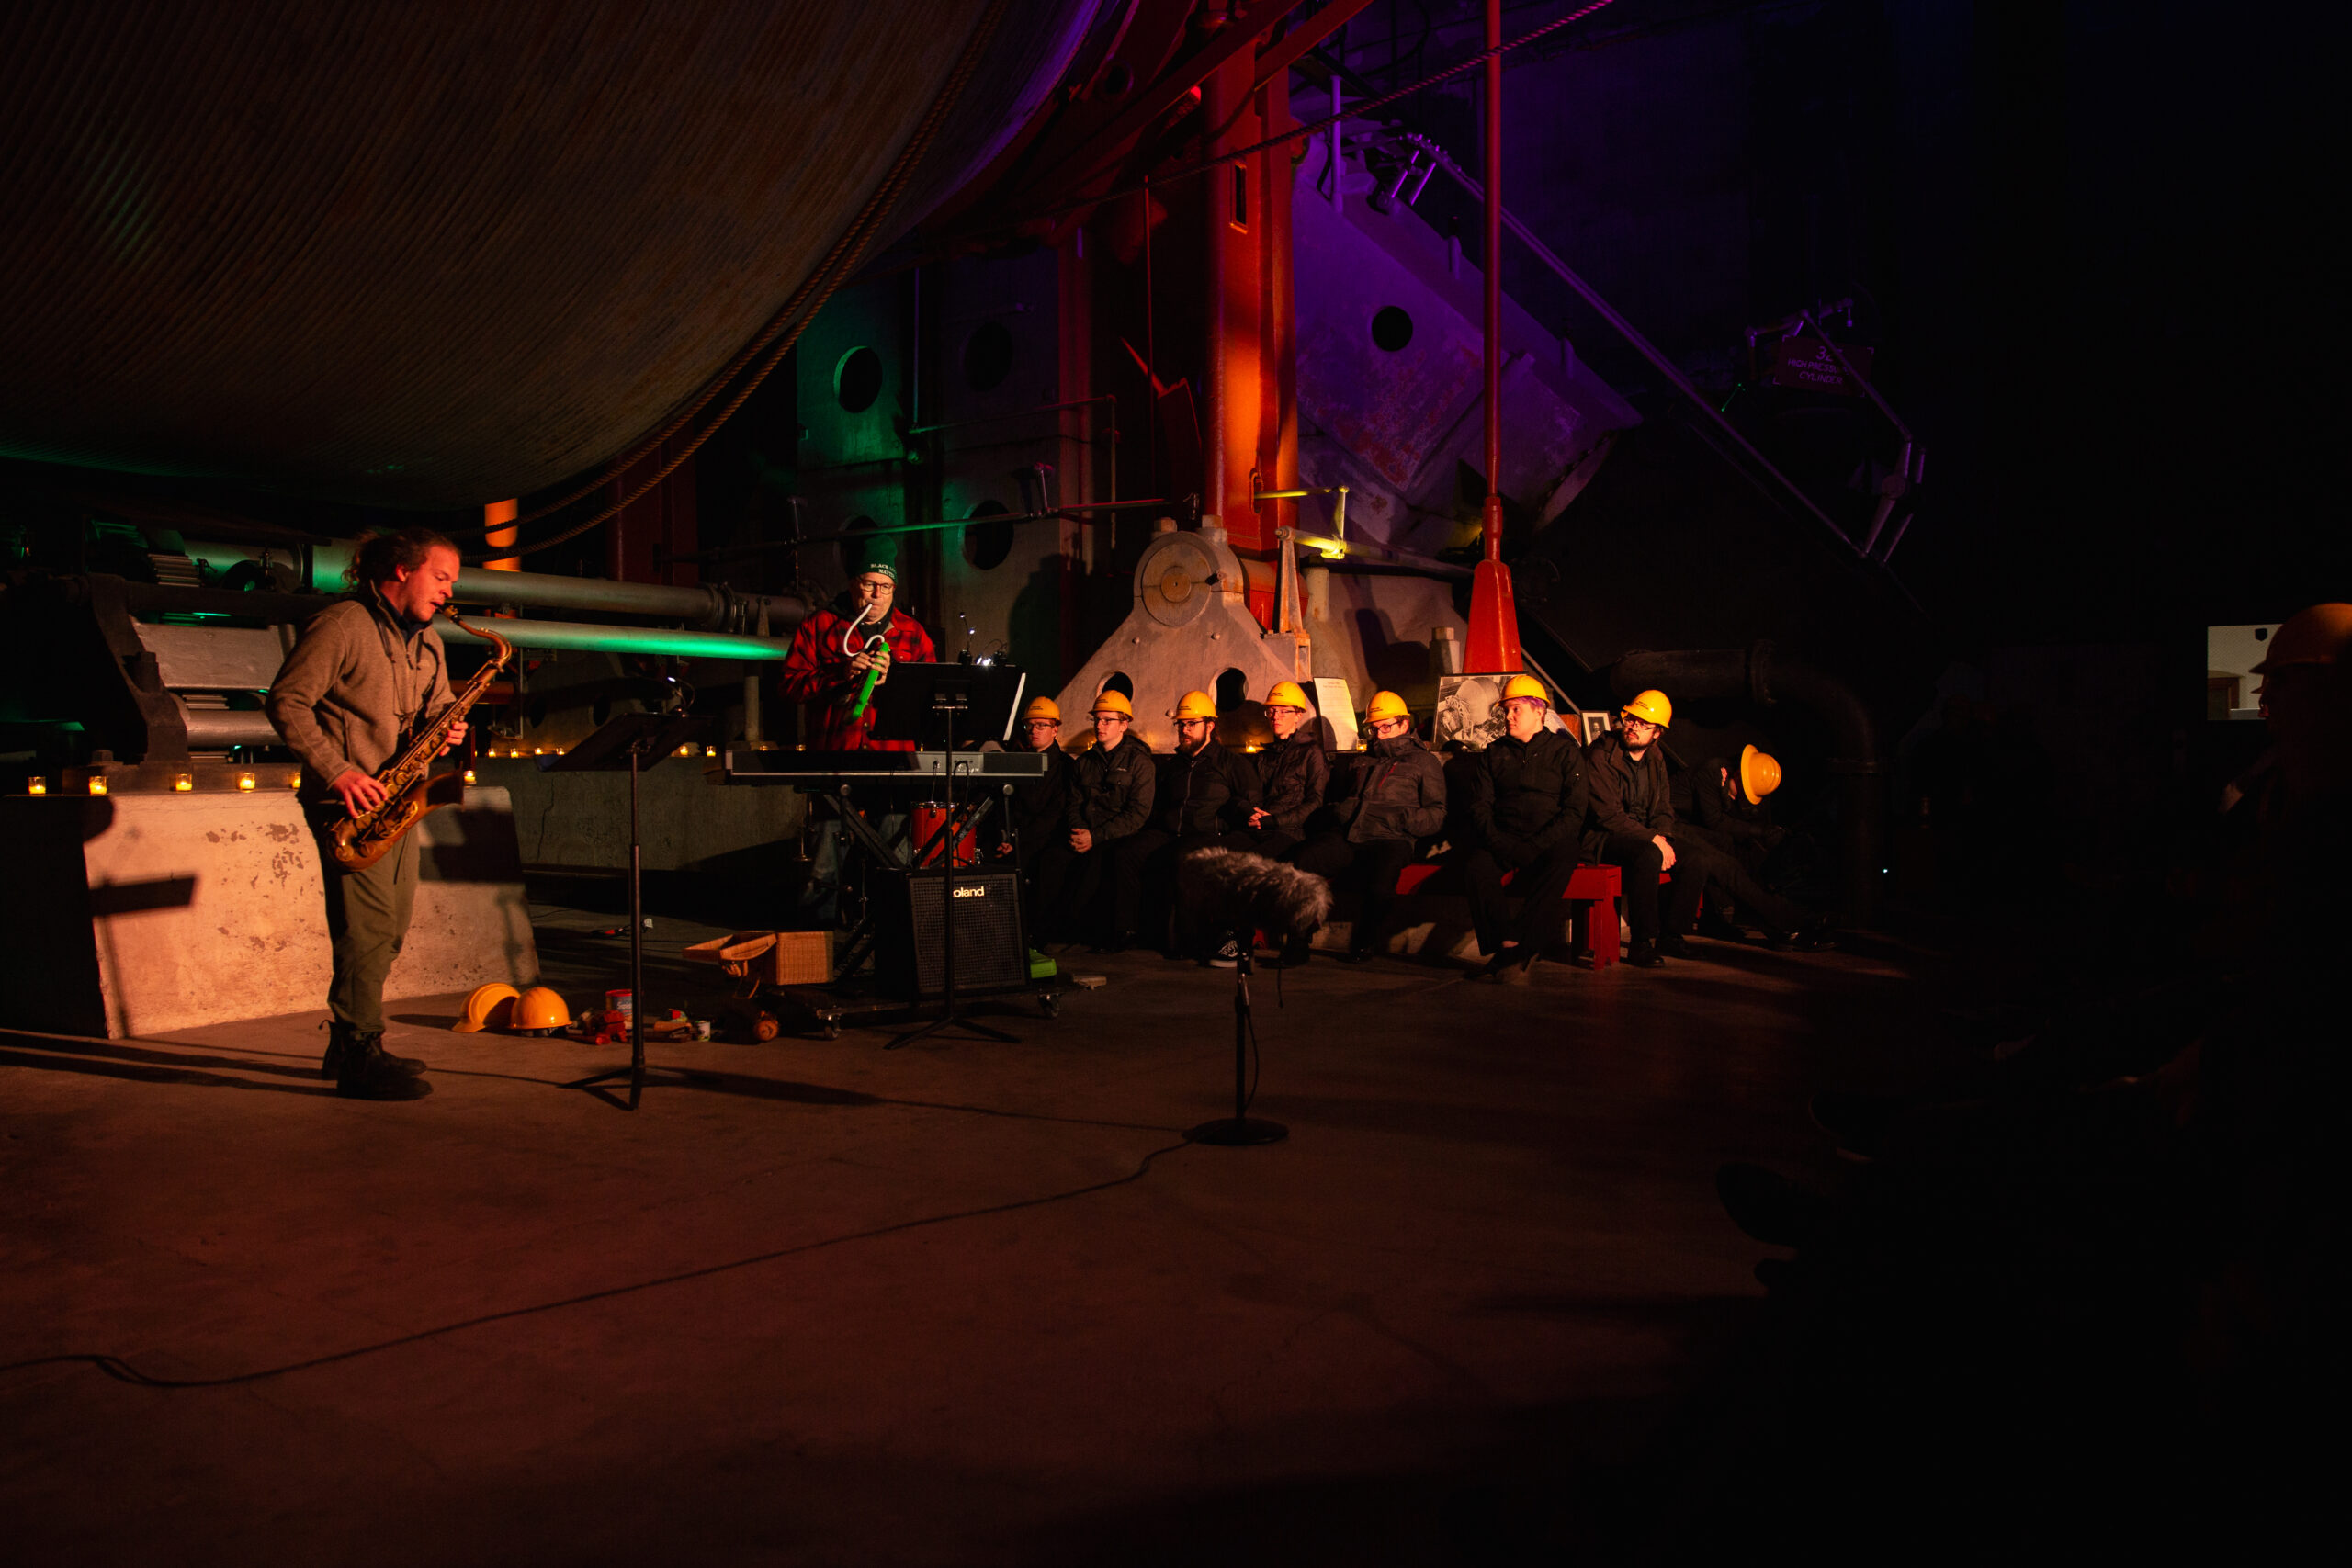 Musicians with wind instruments perform in a dimly-lit space with large industrial equipment. In the background, a group of people dressed in black clothing and yellow hard hats sit on a bench.